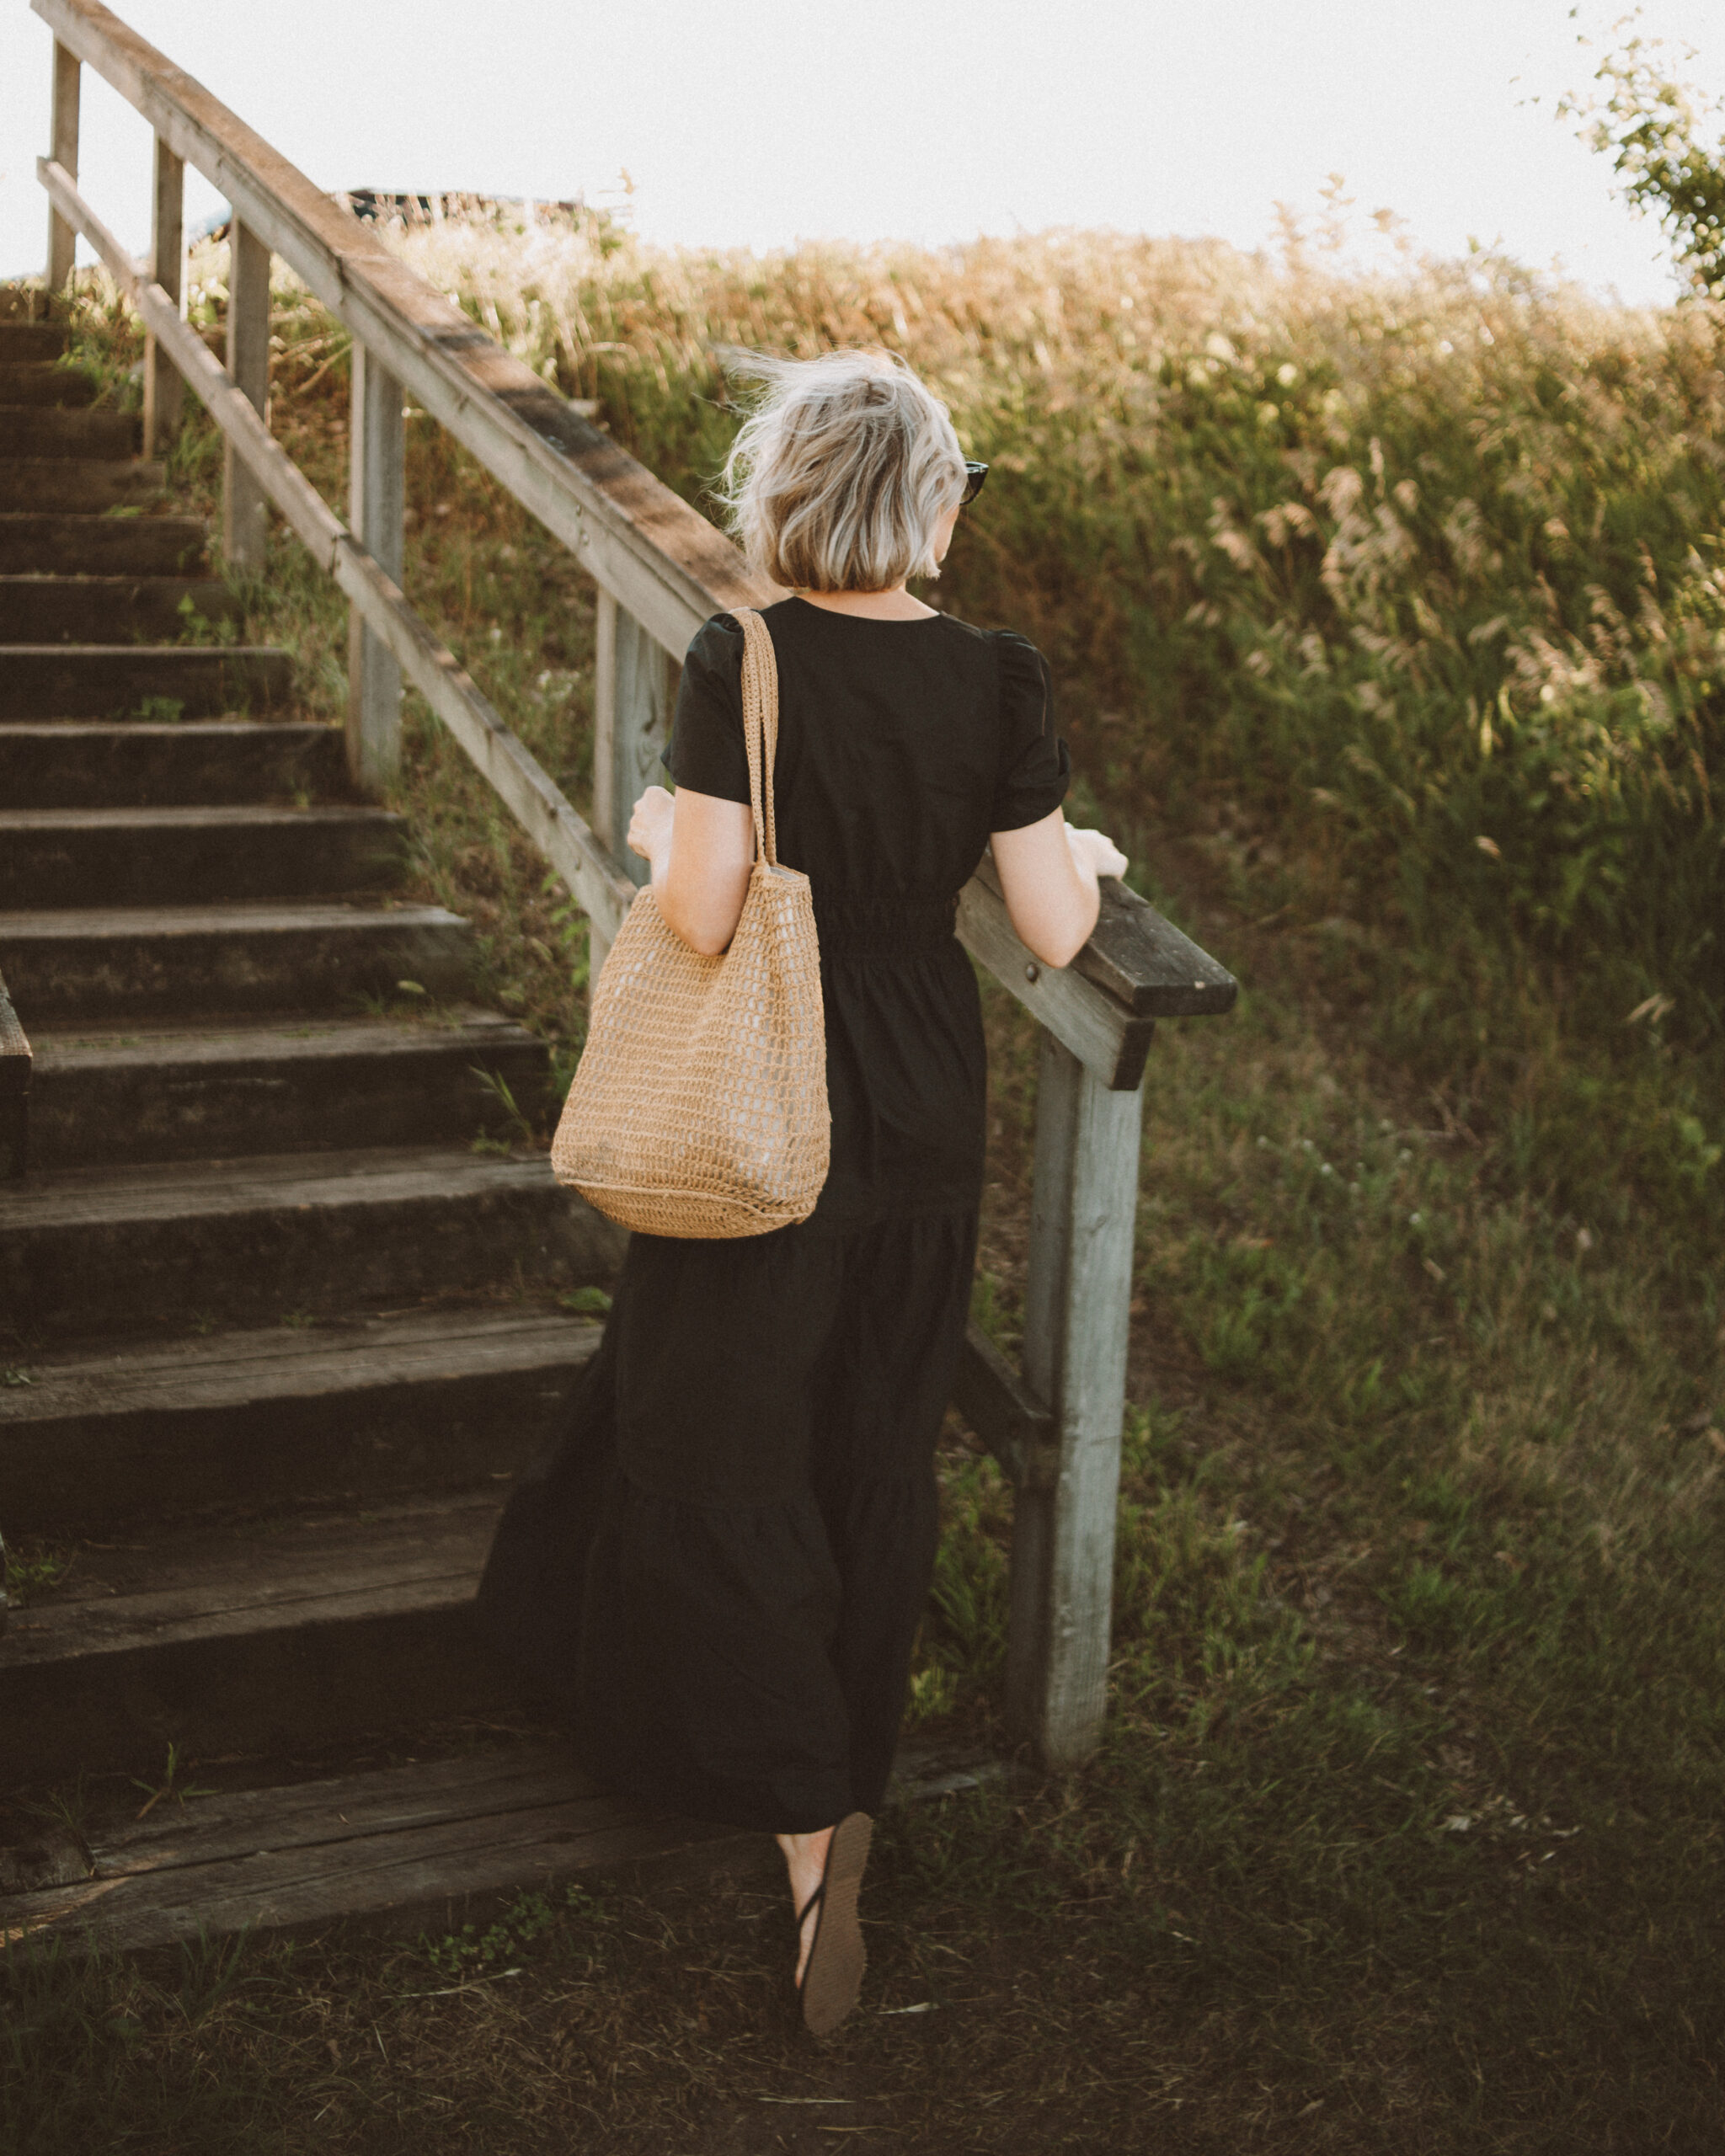 Karin Emily wears a black maxi dress with black sandals and a woven bag